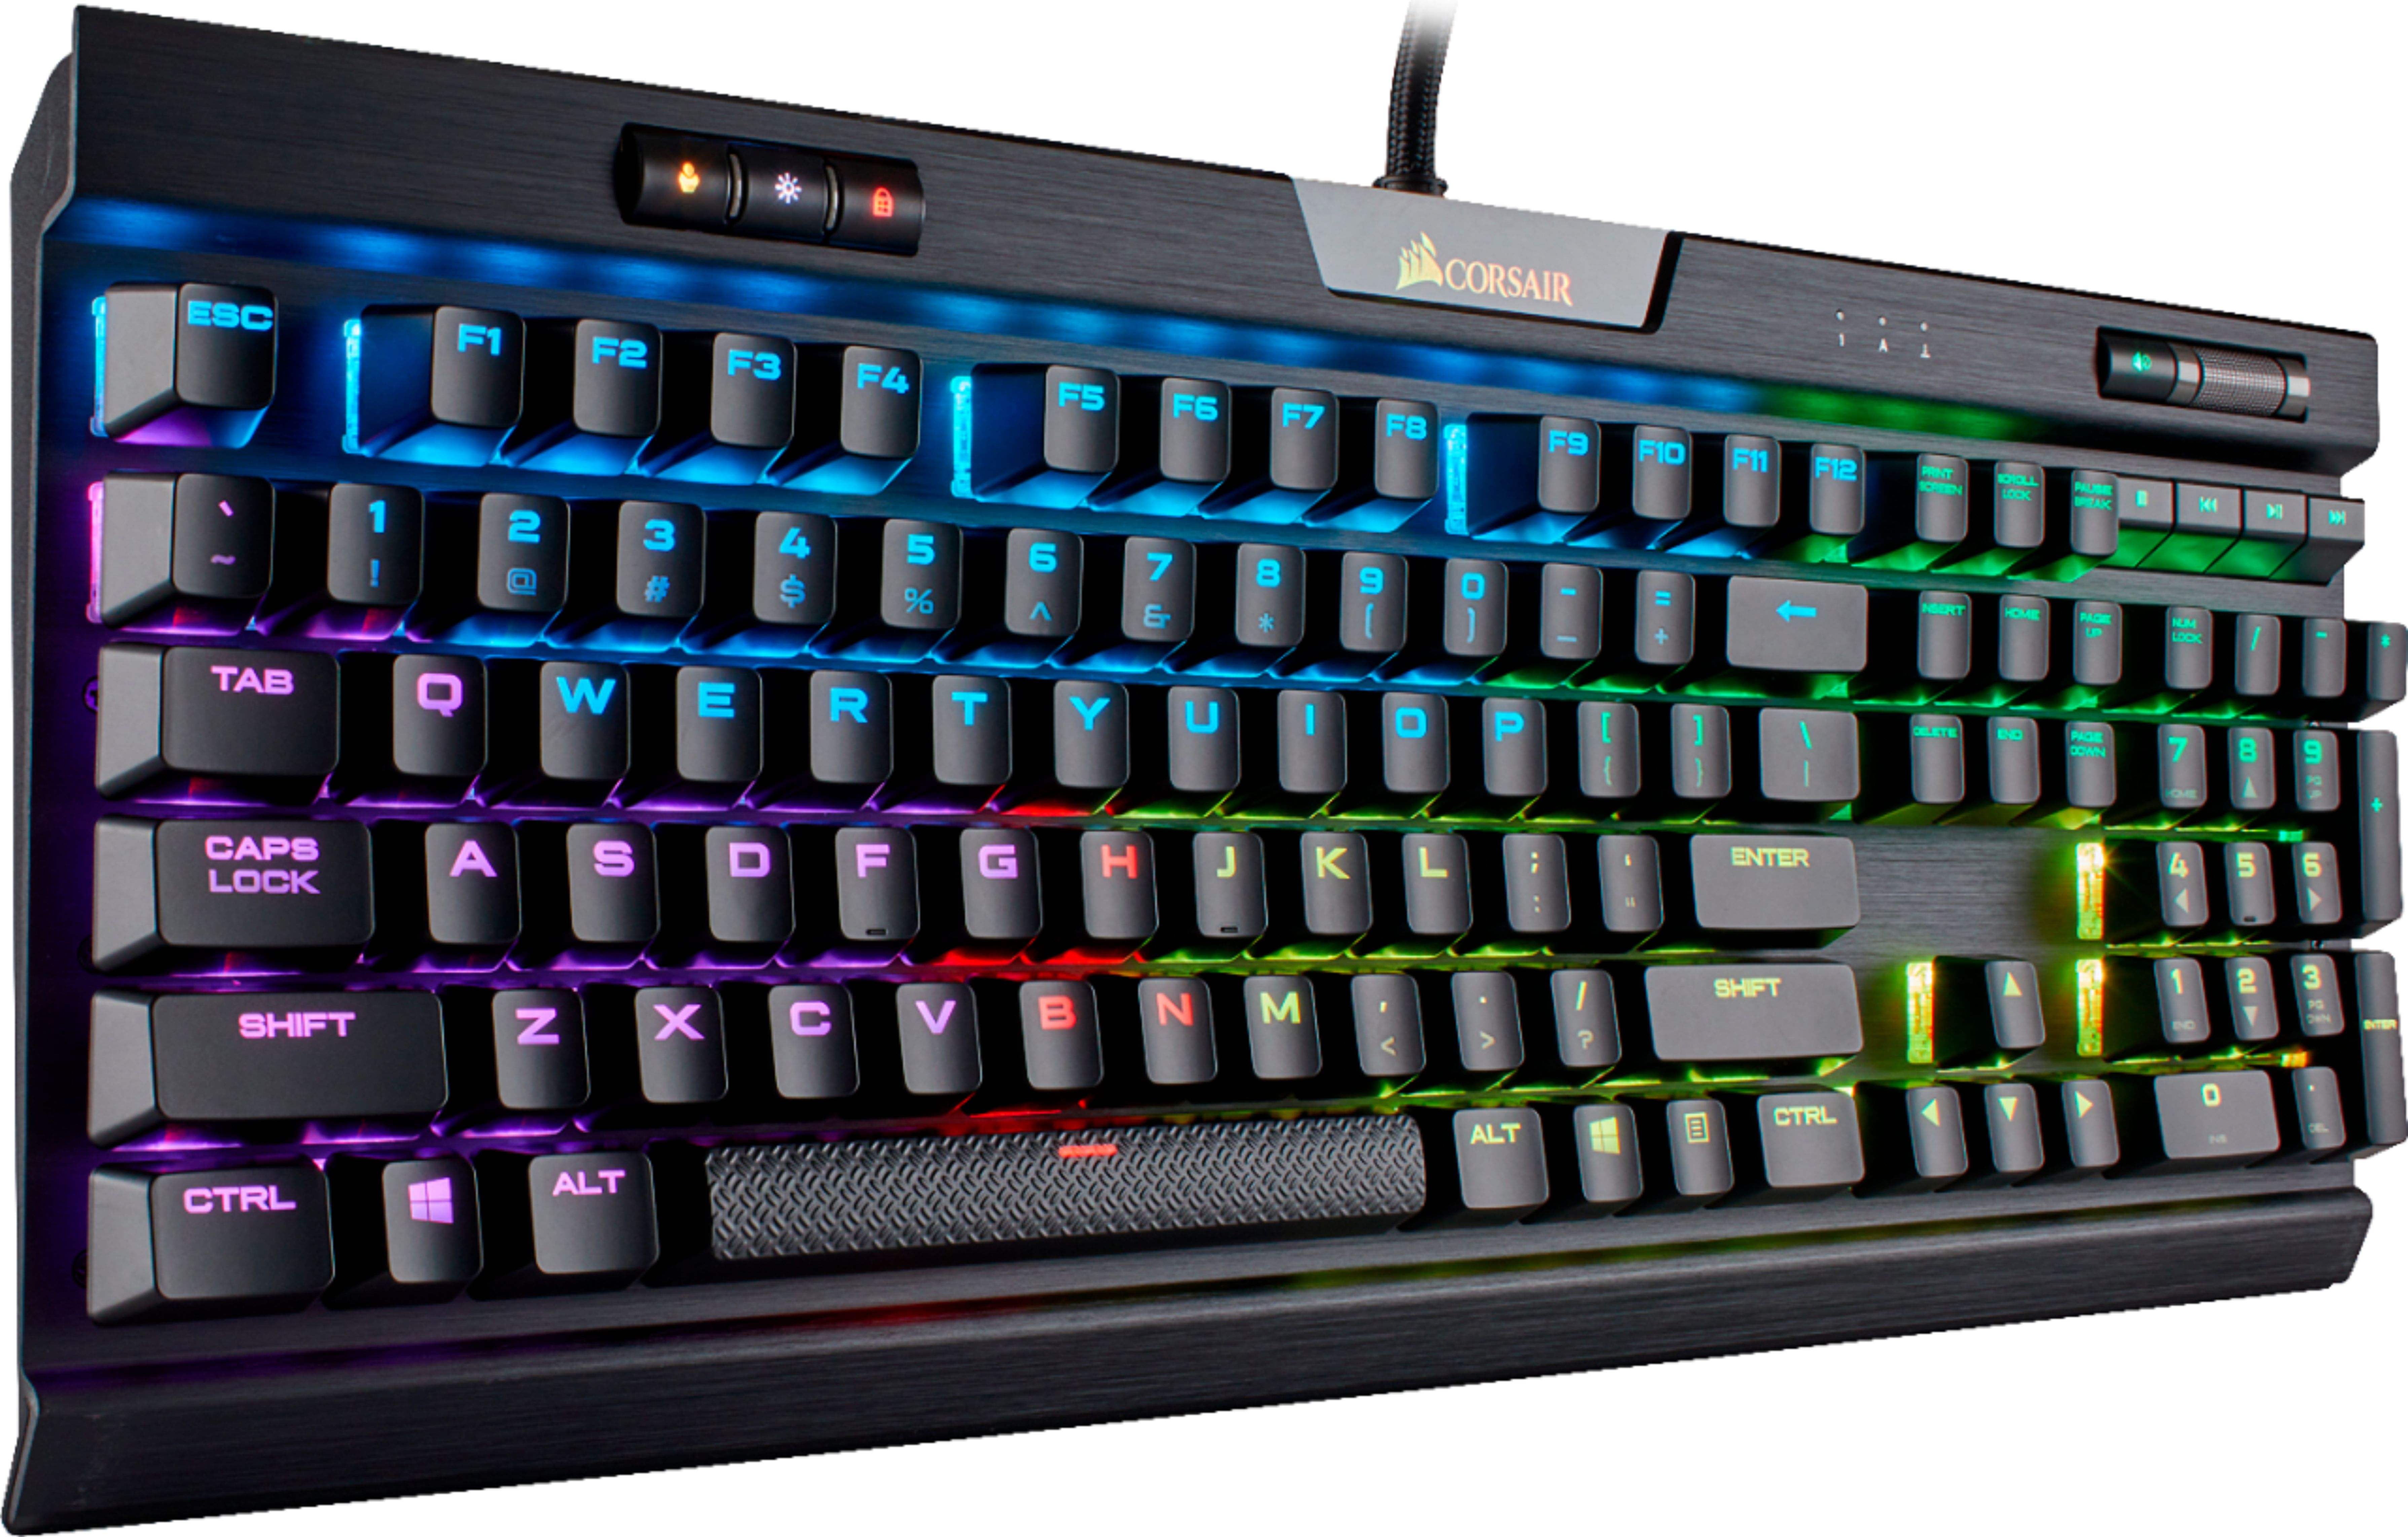 Best Buy: CORSAIR K70 RGB MK. RAPIDFIRE Full-size Wired Mechanical Cherry MX Speed Linear Switch Gaming Keyboard with USB Pass Through Black CH-9109014-NA